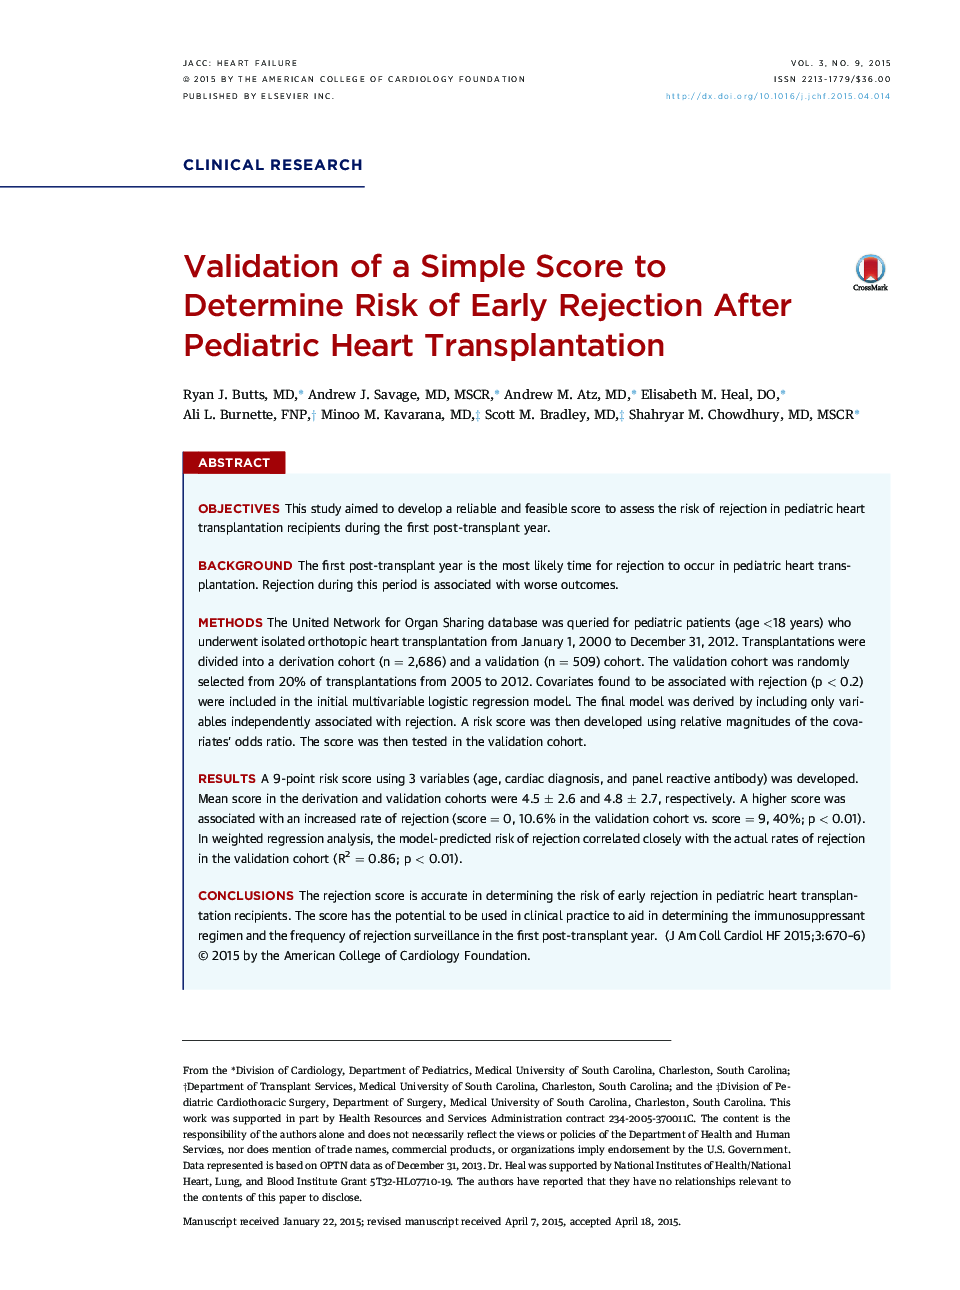 Validation of a Simple Score to DetermineÂ Risk of Early Rejection After Pediatric Heart Transplantation